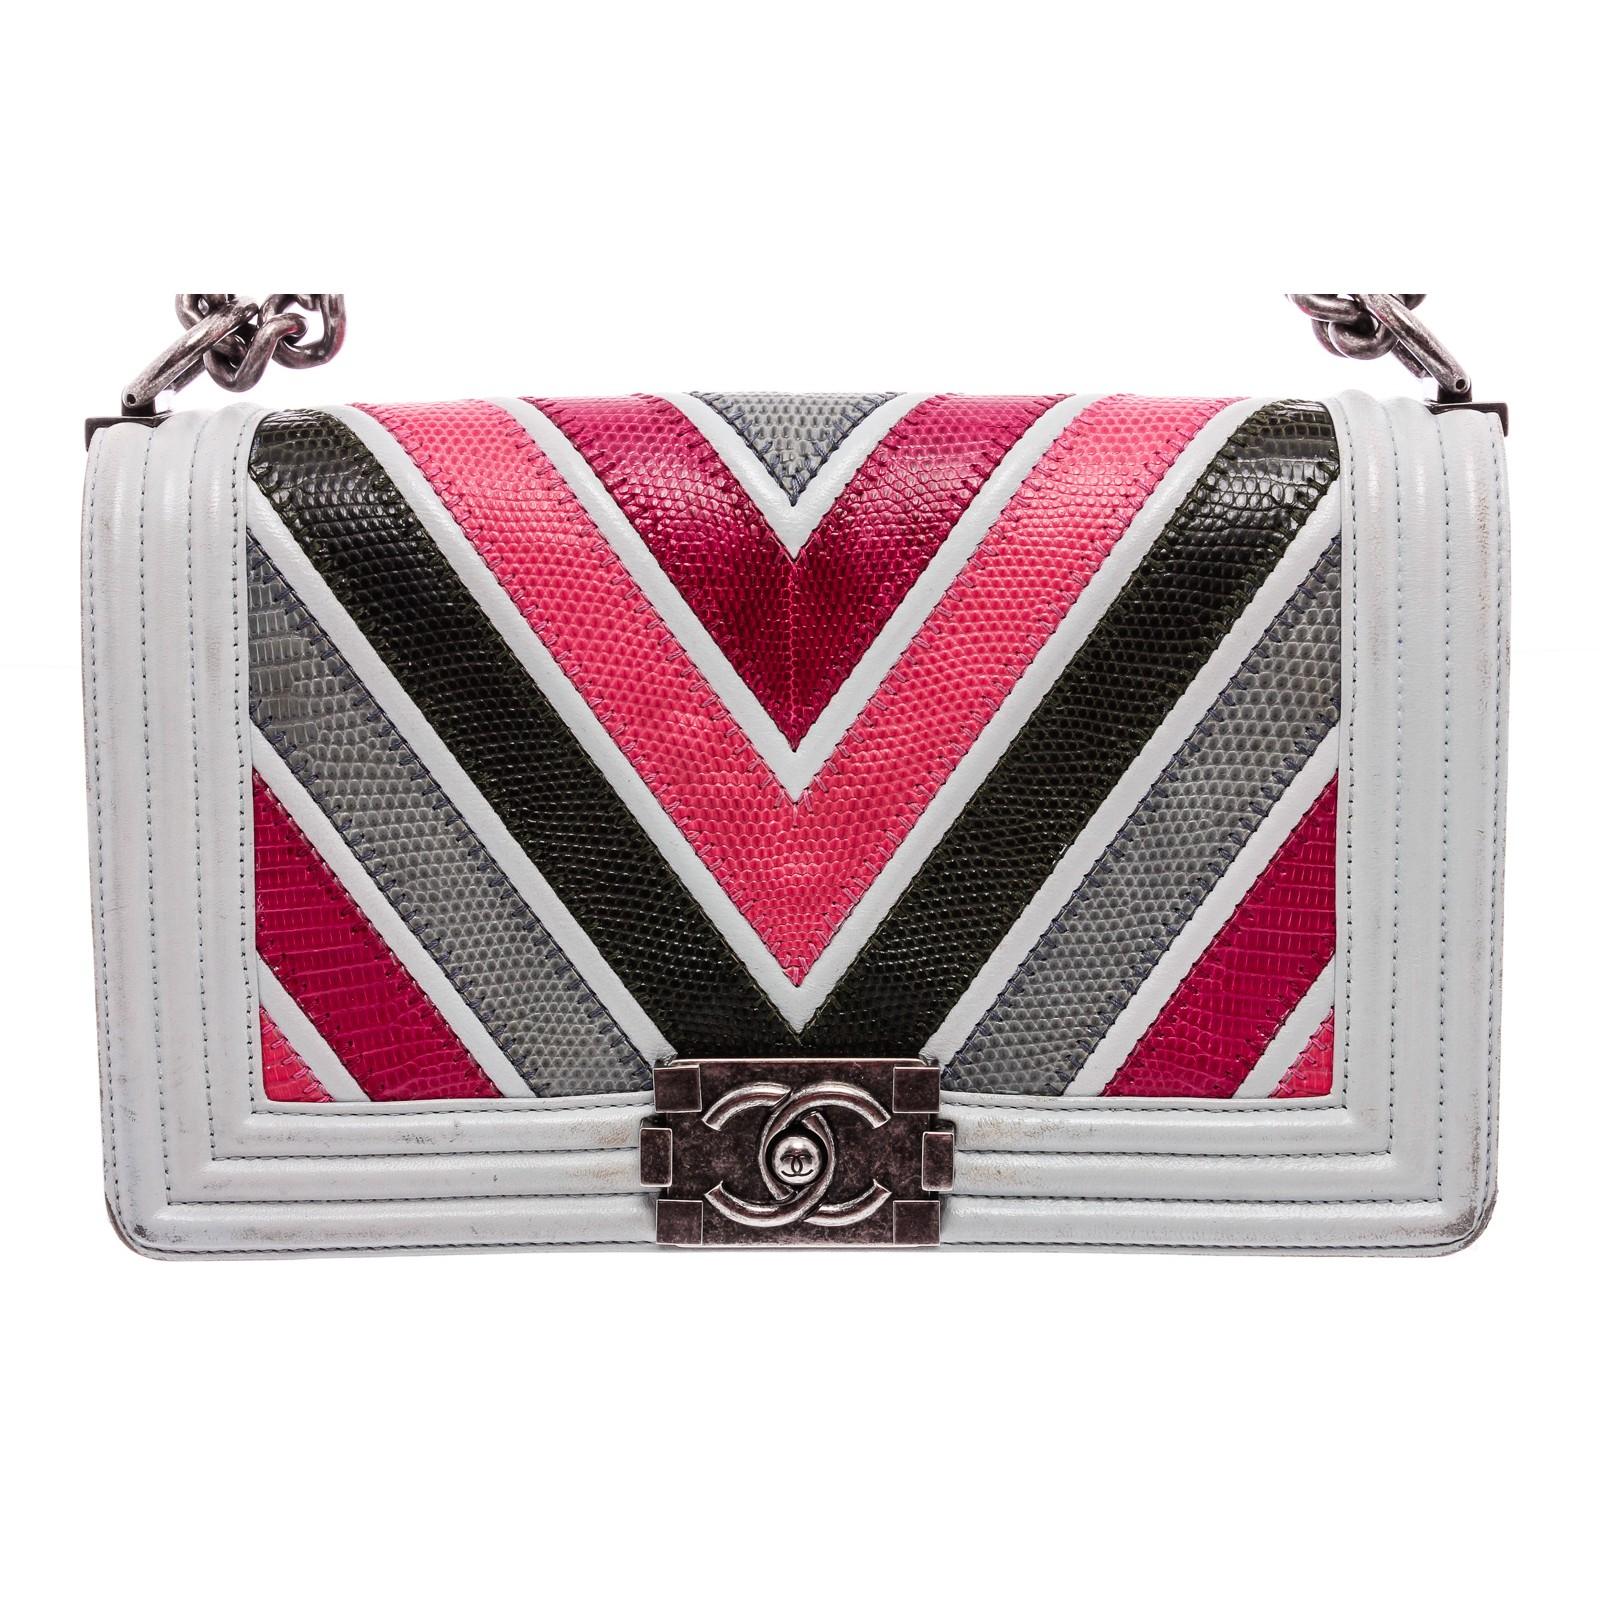 Pink and multicolor chevron quilted lizard Chanel Medium Boy Bag with antiqued ruthenium hardware, convertible chain-link shoulder strap with leather shoulder guard, light blue lambskin trim, black leather interior, single slit pocket at interior